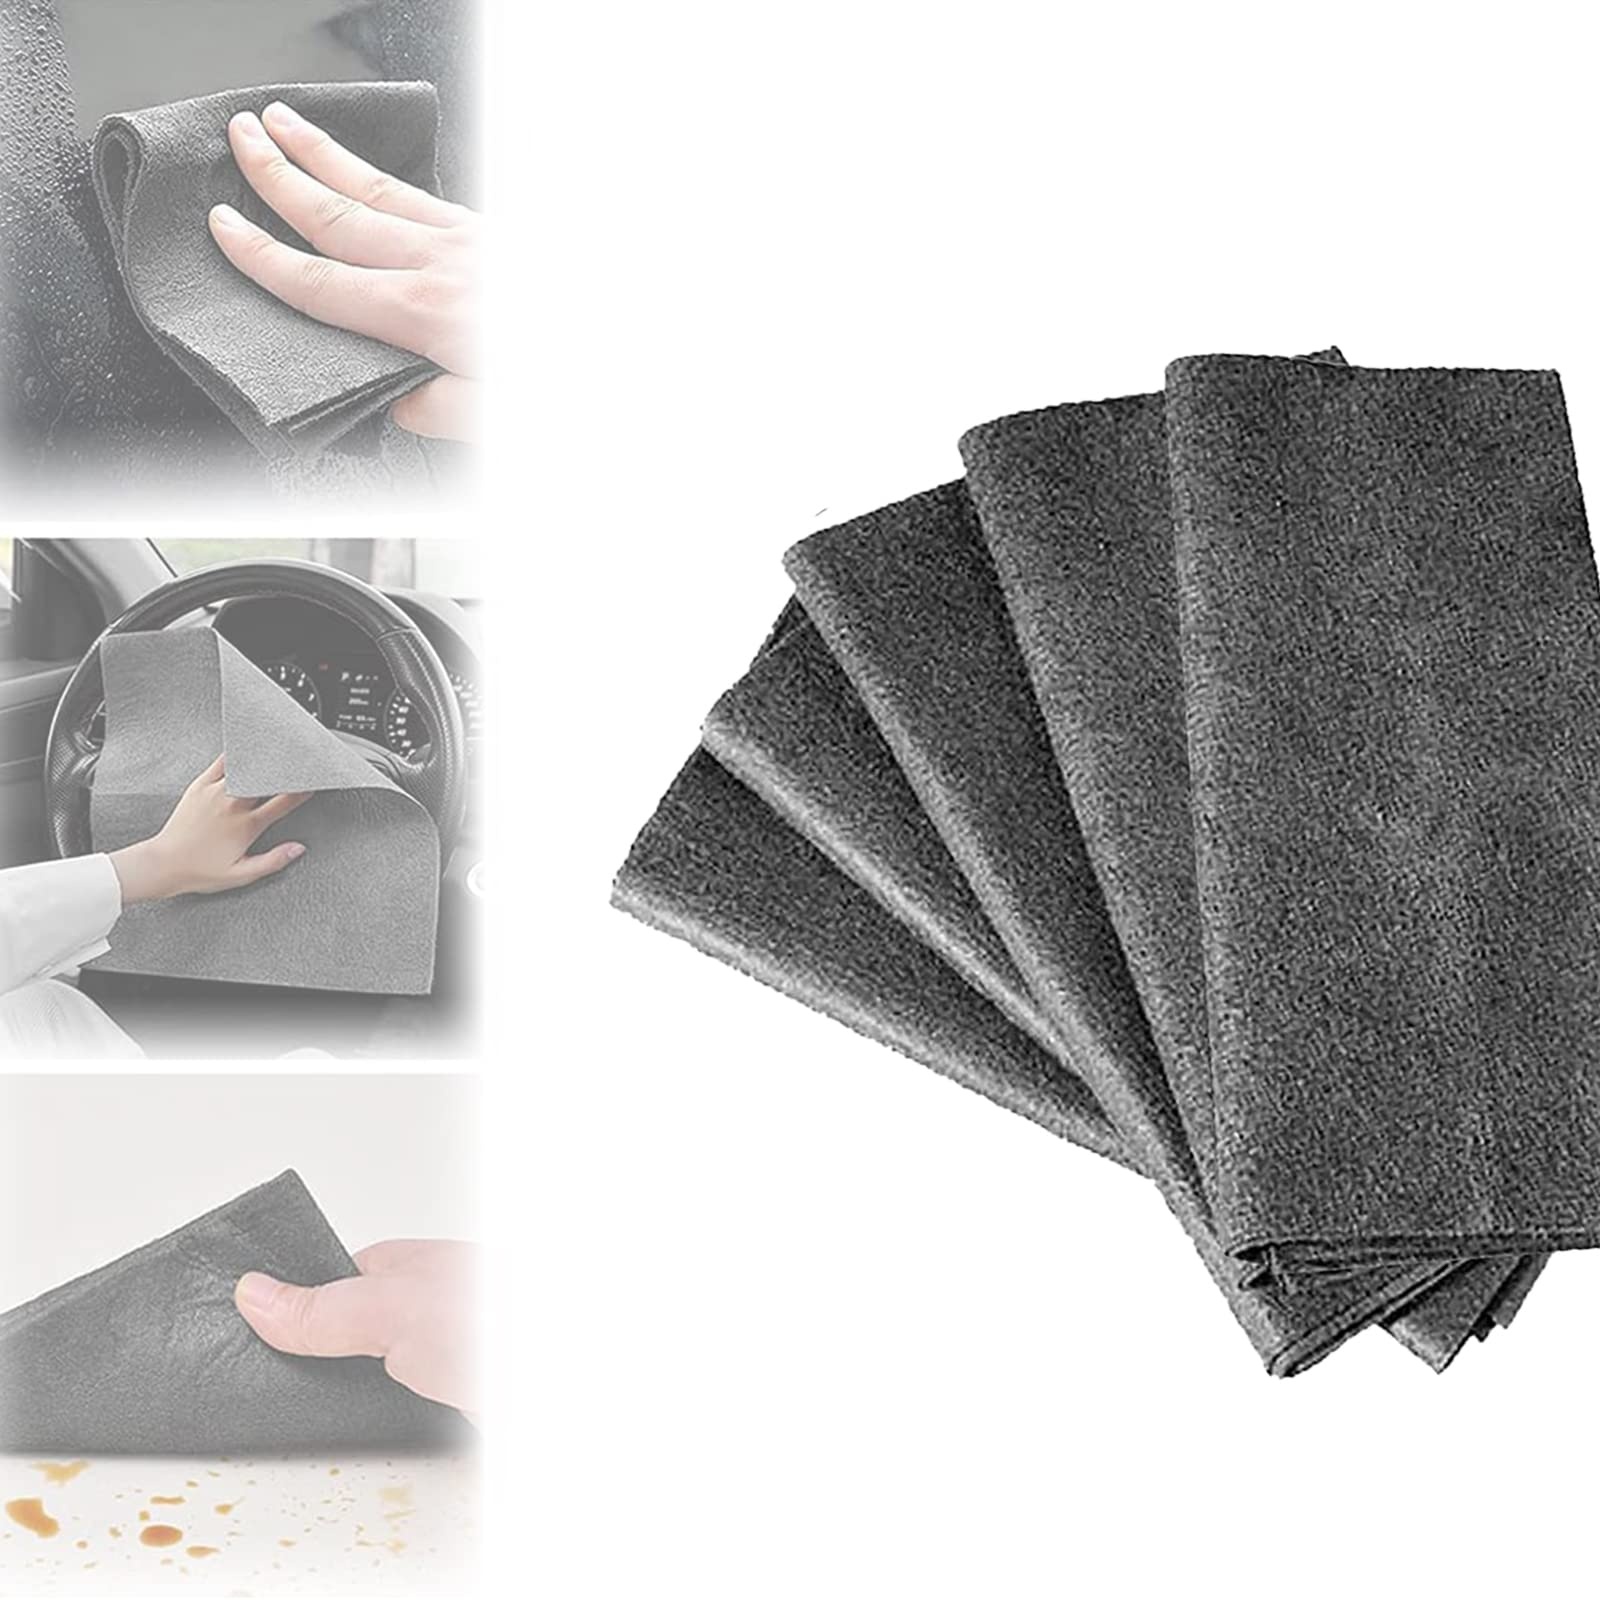 Thickened Magic Cleaning Cloth,Magic Cleaning Cloth,Sonorou Cleaning Cloth,Streak Free Reusable Microfiber Cleaning Rags,for Glass Windows Cleaning (5 pcs-grey,7.9 * 11.8 Inch)